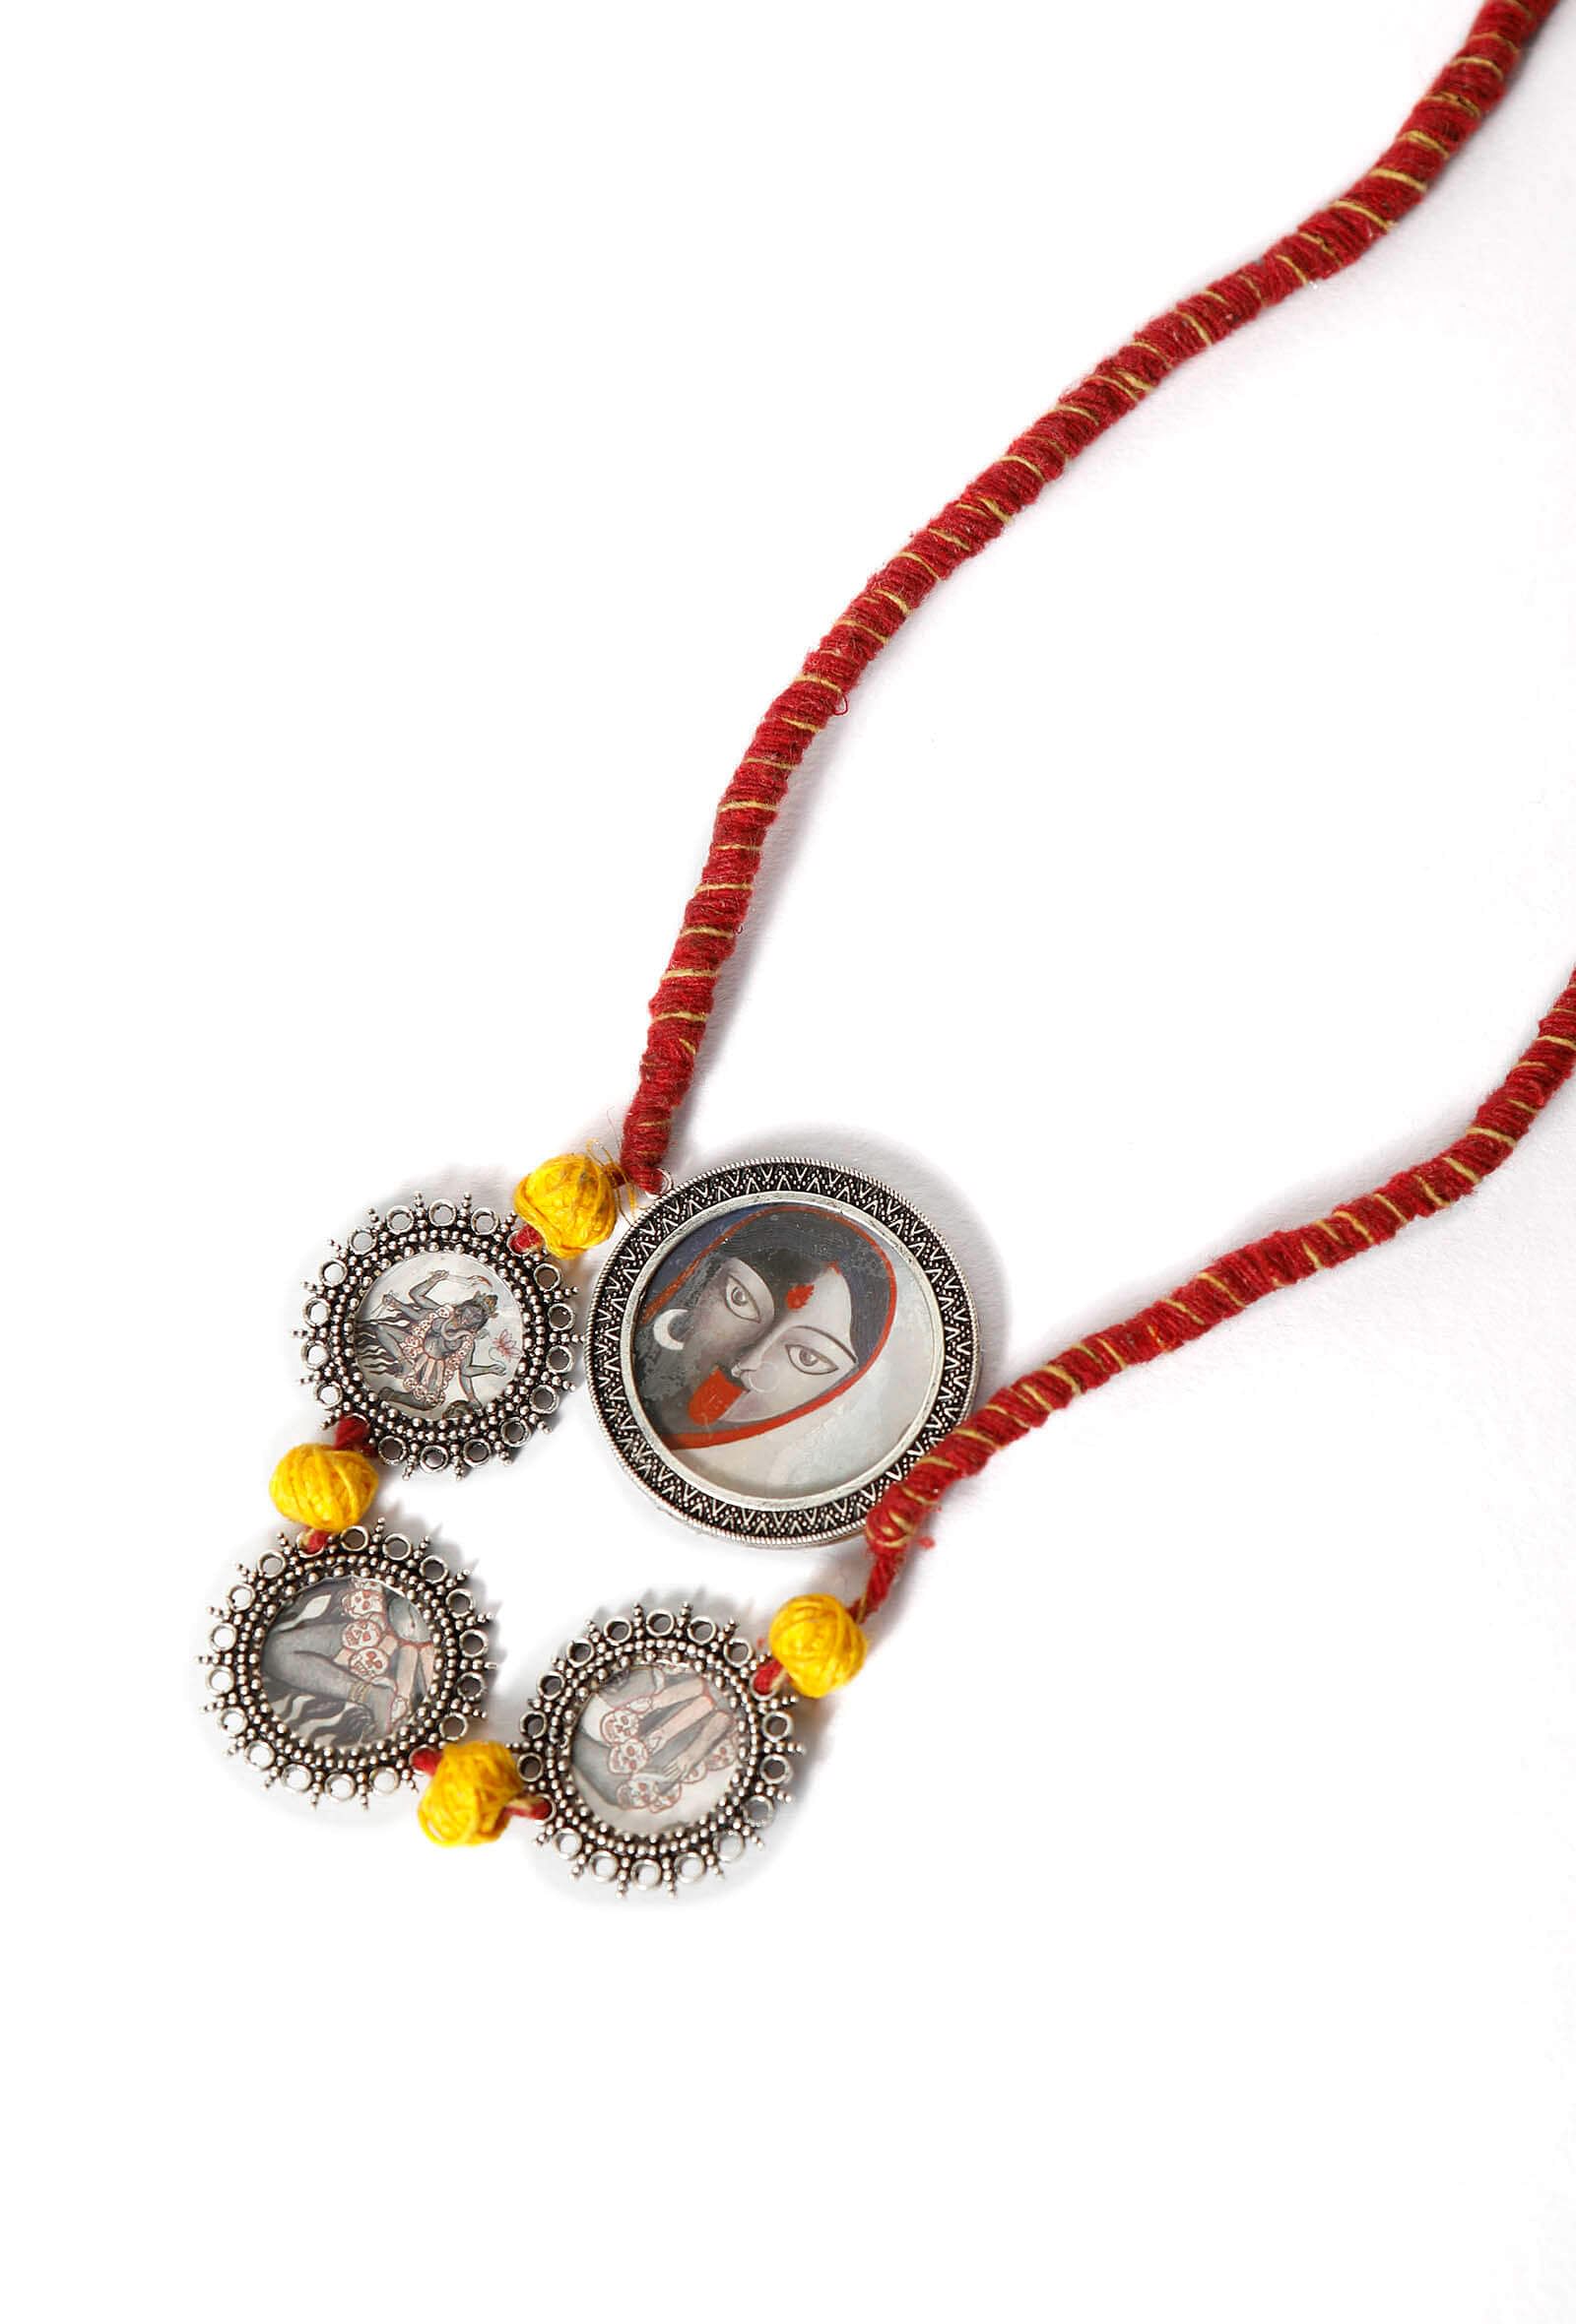 Goddess Kali Red Cord Necklace